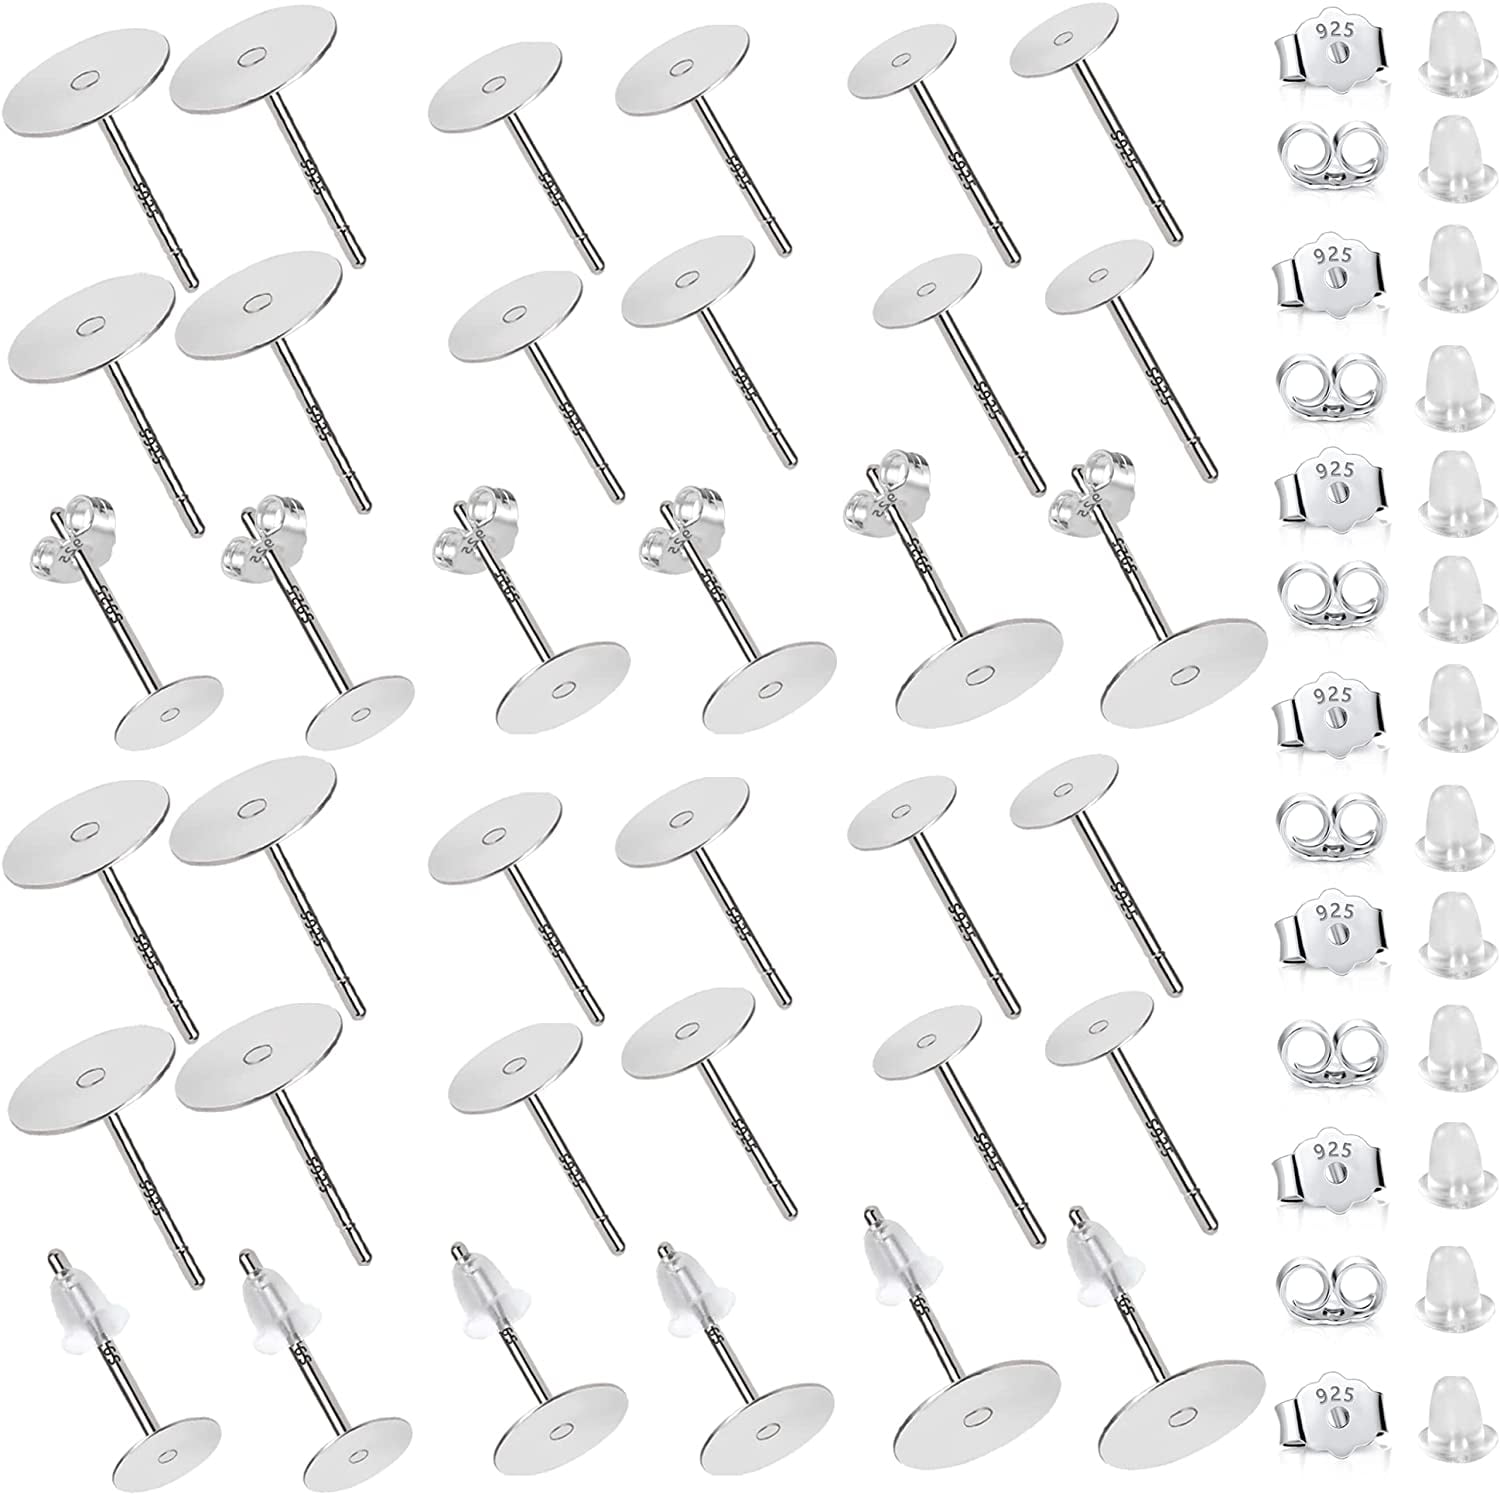 200PCS Nickel-free Stainless Steel Earrings Posts Flat Pad, Earring Backs  for Studs, Hypoallergenic Earring Studs with Butterfly and Rubber Bullet  Earring Making Kit for Jewelry Making DIY Supplies 